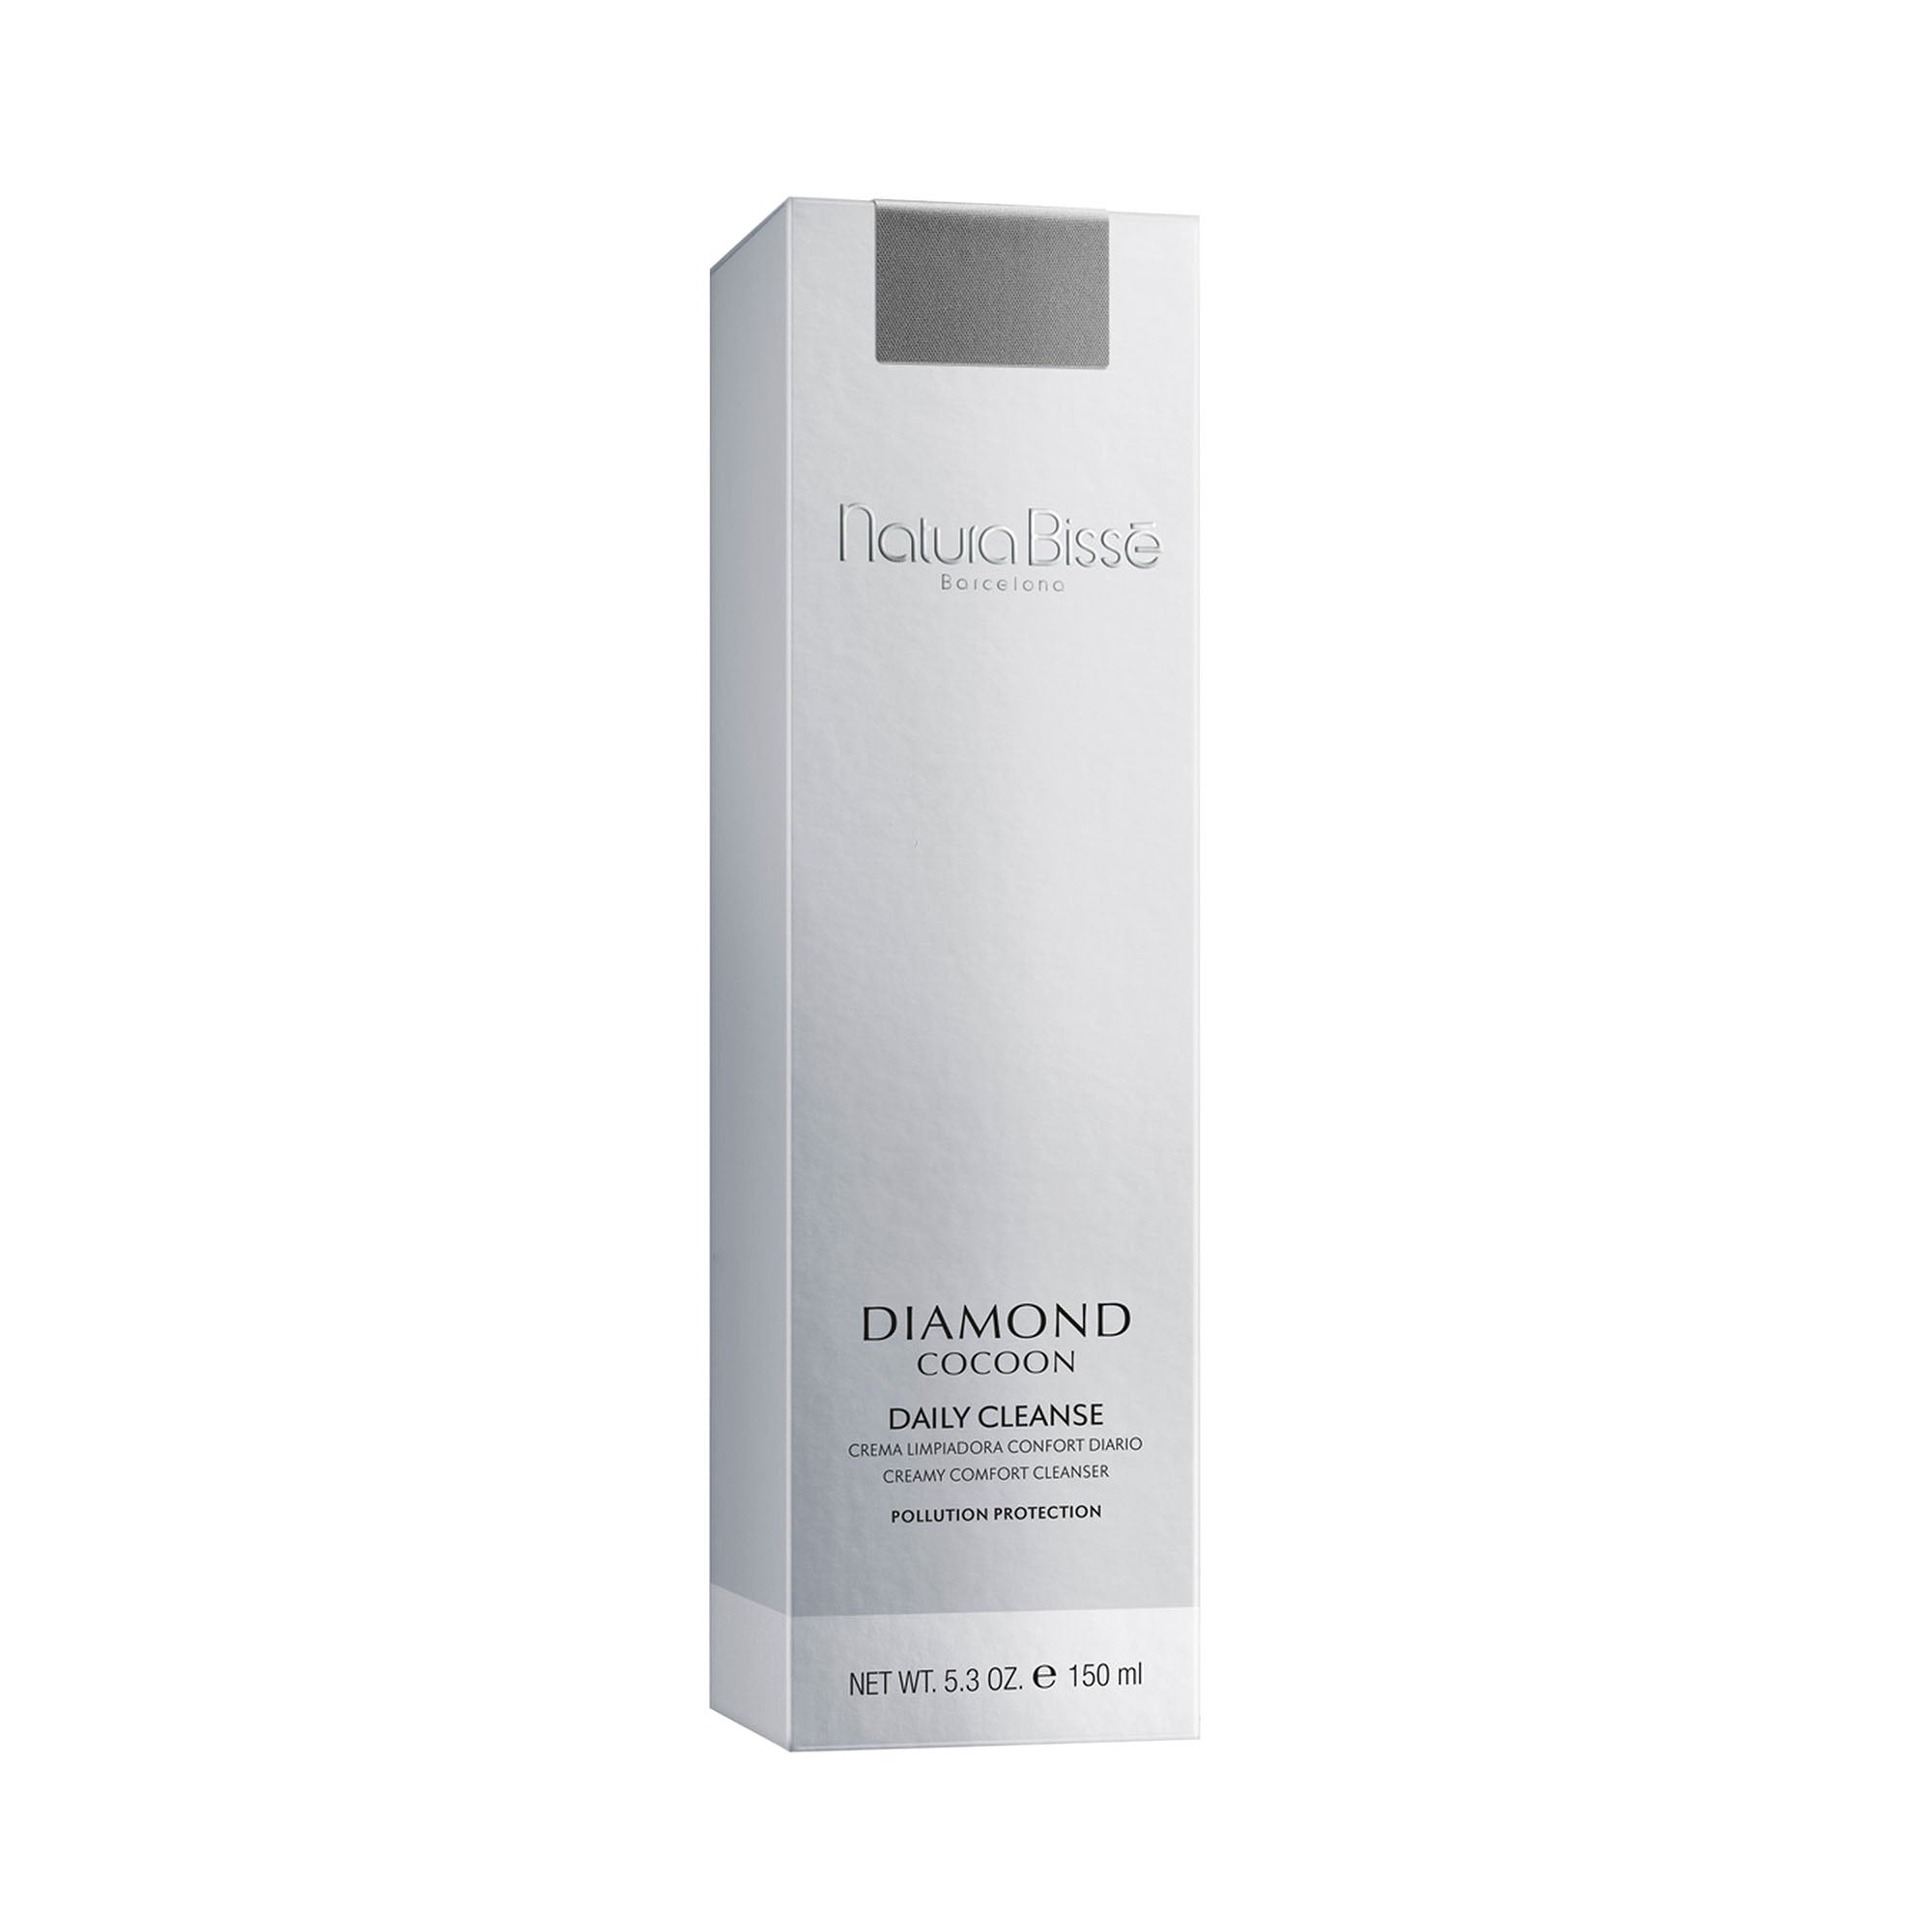 Natura Bisse Diamond Cocoon Daily Cleanse / 5.3OZ